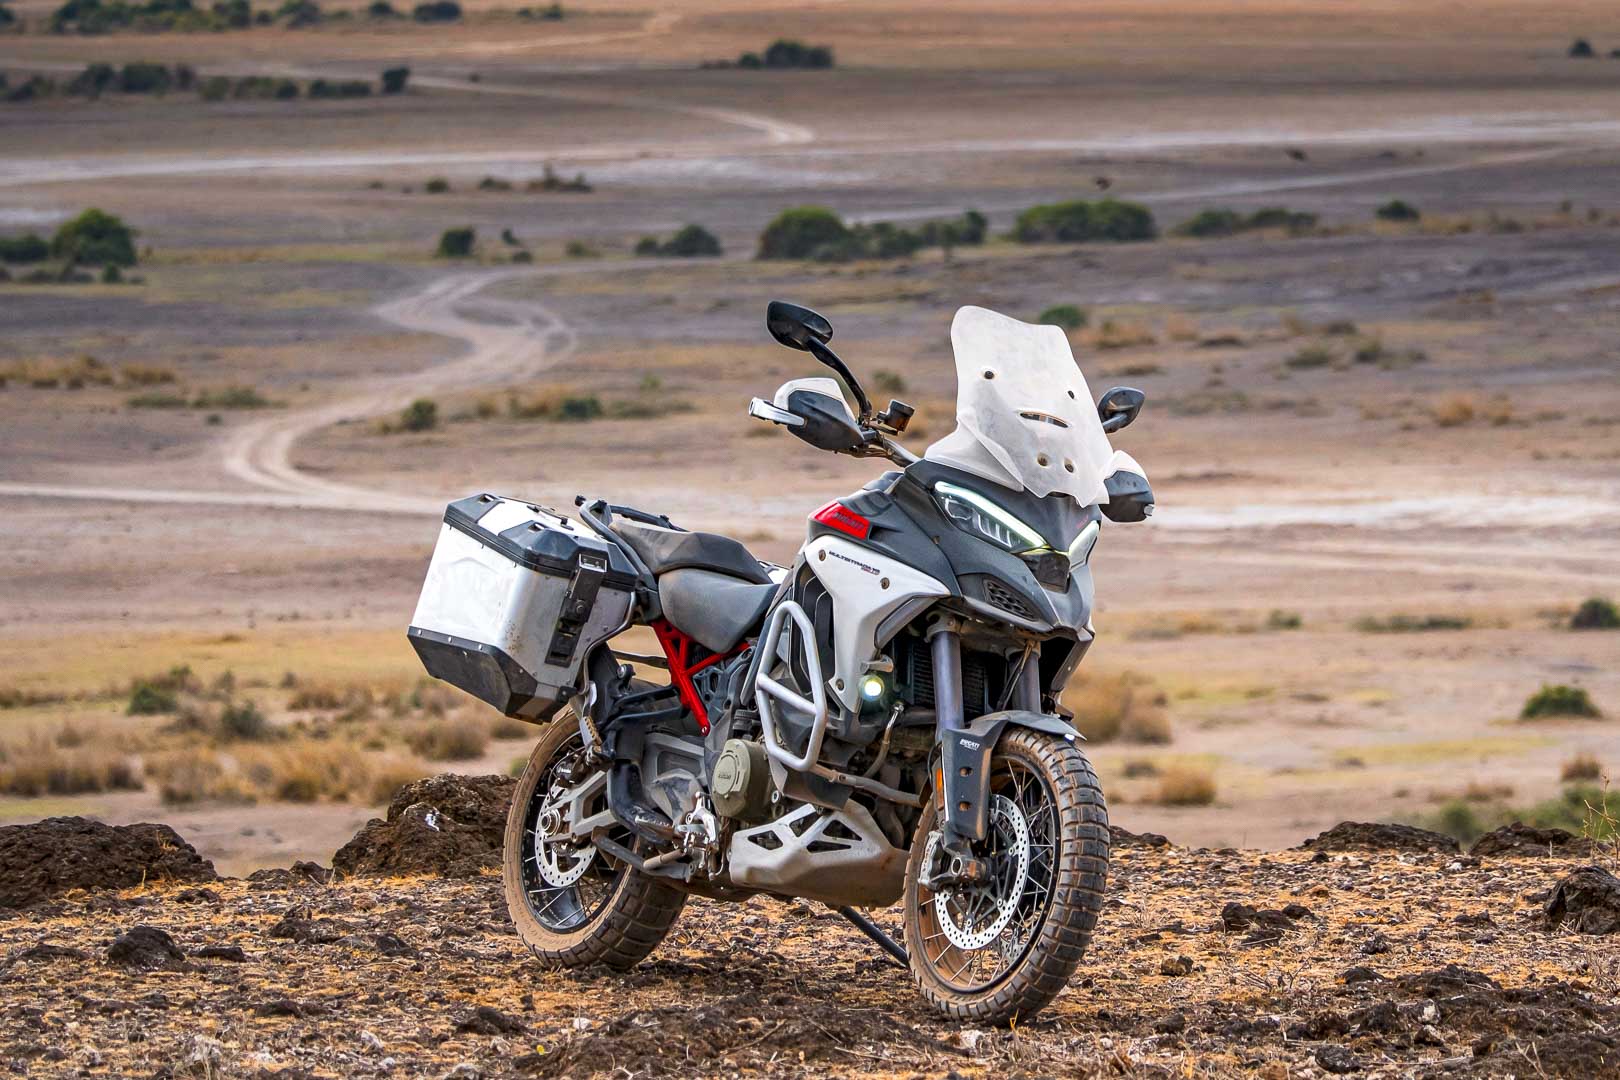 Ducati Multistrada V4 Rally arrives with 19/17 wheels for off-road ability